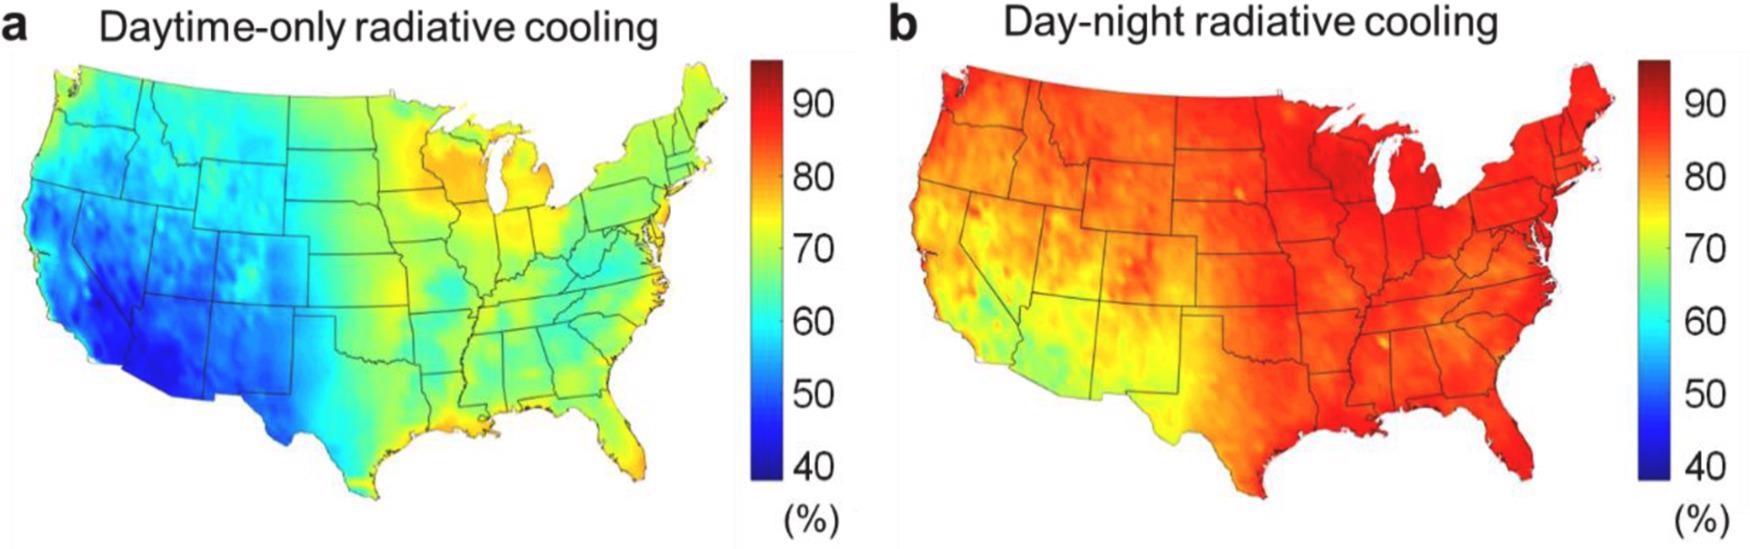 Annual water saving maps of the contiguous US for wet-cooled CSP plants. (a) The daytime-only radiative cooling system. (b) The day-night radiative cooling system. The daytime-only radiative cooling system potentially reduces 40 – 60% of the water loss of CSP plants in the southwestern US region while the day-night radiative cooling system reduces the water loss by 65 – 85% in the same region.